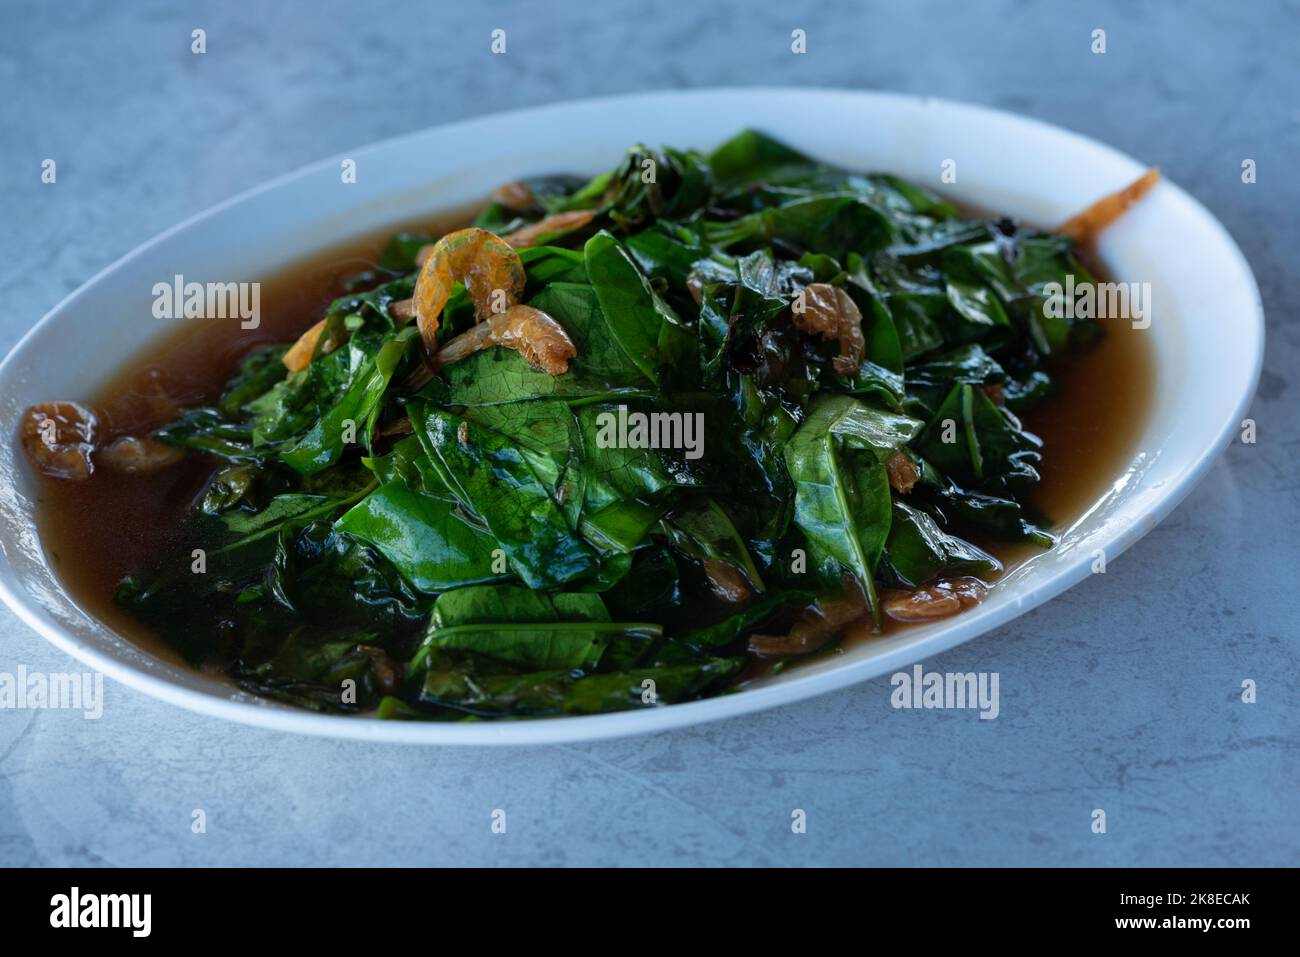 A plate of delicious stir-fried malindjo leaves with dried shrimp on the table. Stock Photo